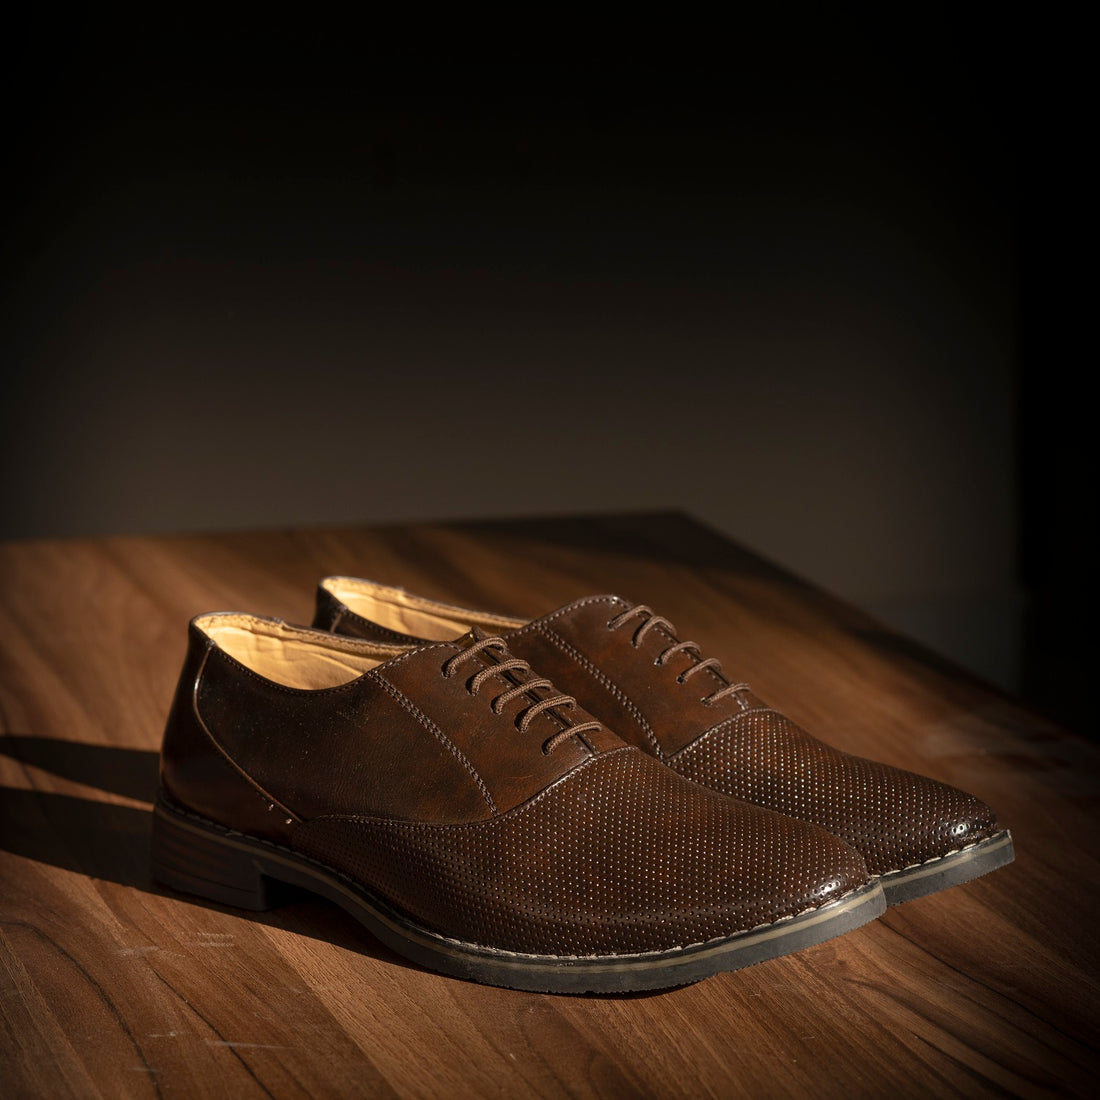 The Aurous Orion Oxford Formal Laceup Derby Shoes With Dotted Texture ...